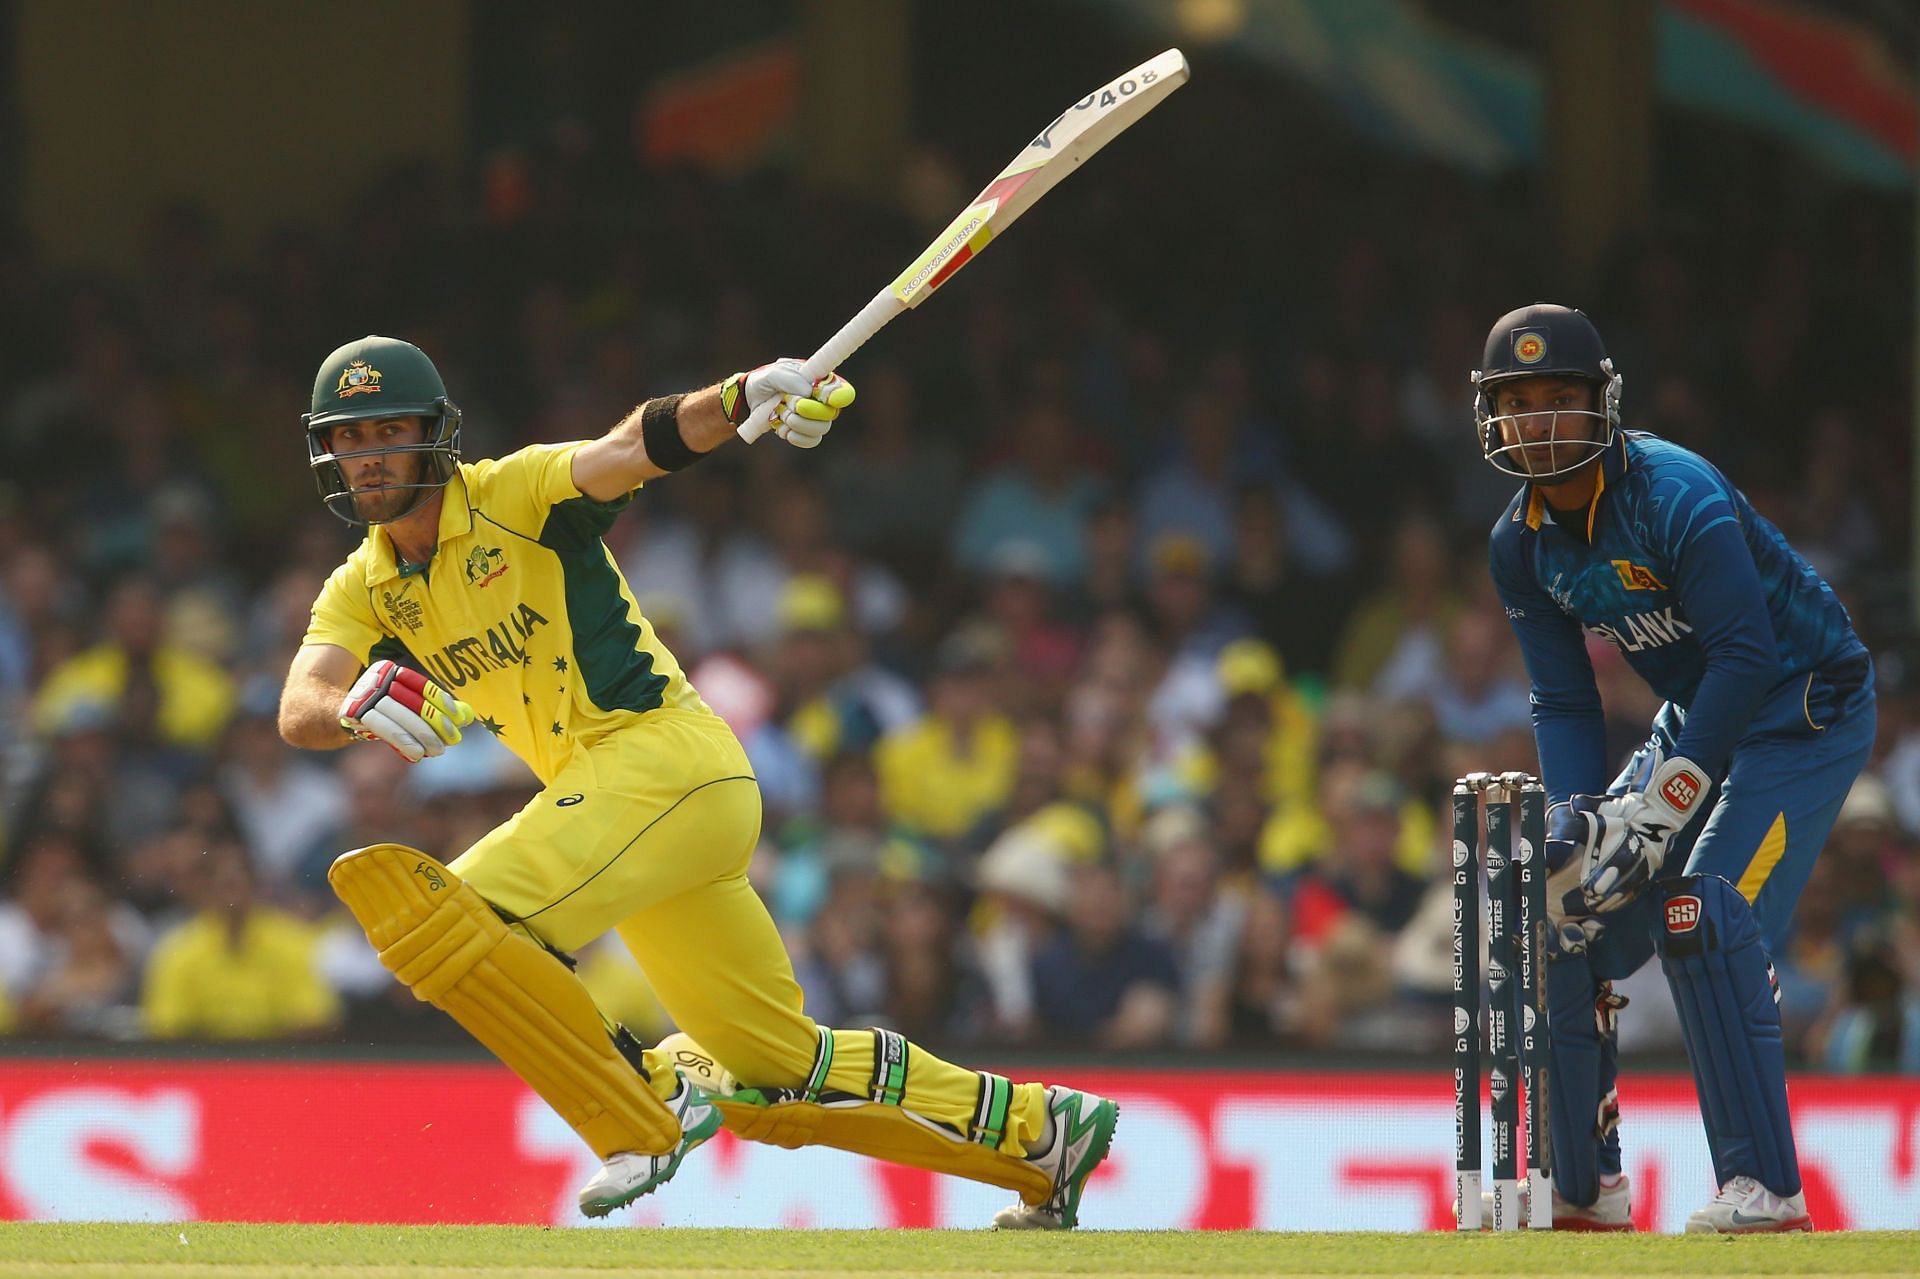 Glenn Maxwell destroyed the Sri Lankan bowling unit at the 2015 World Cup (Picture Credits: Getty).